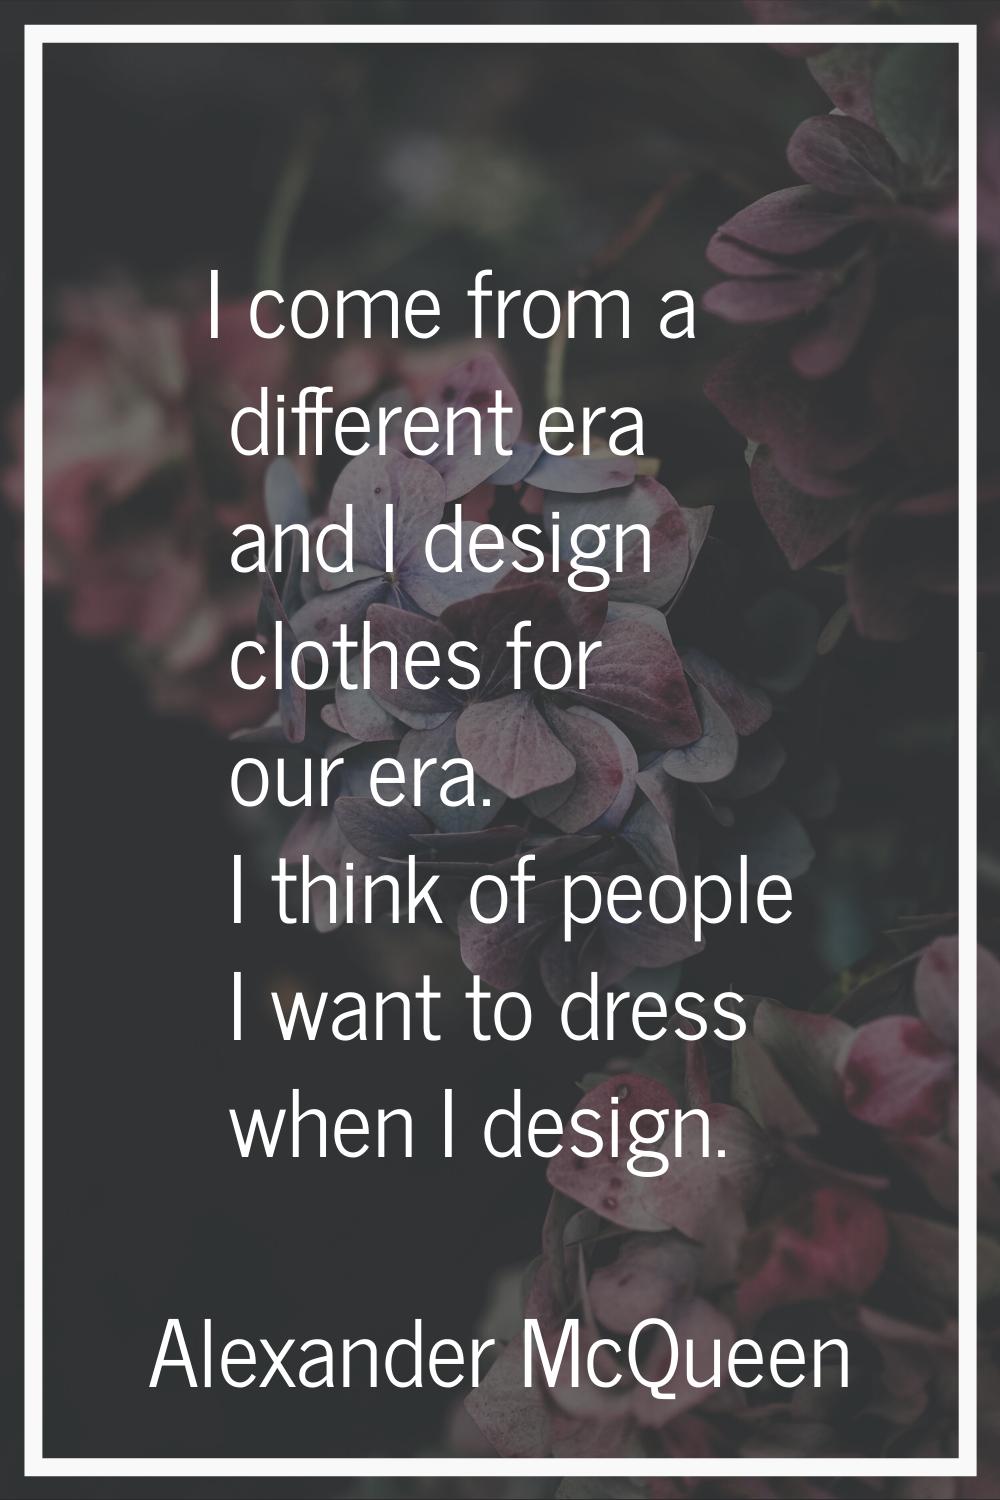 I come from a different era and I design clothes for our era. I think of people I want to dress whe